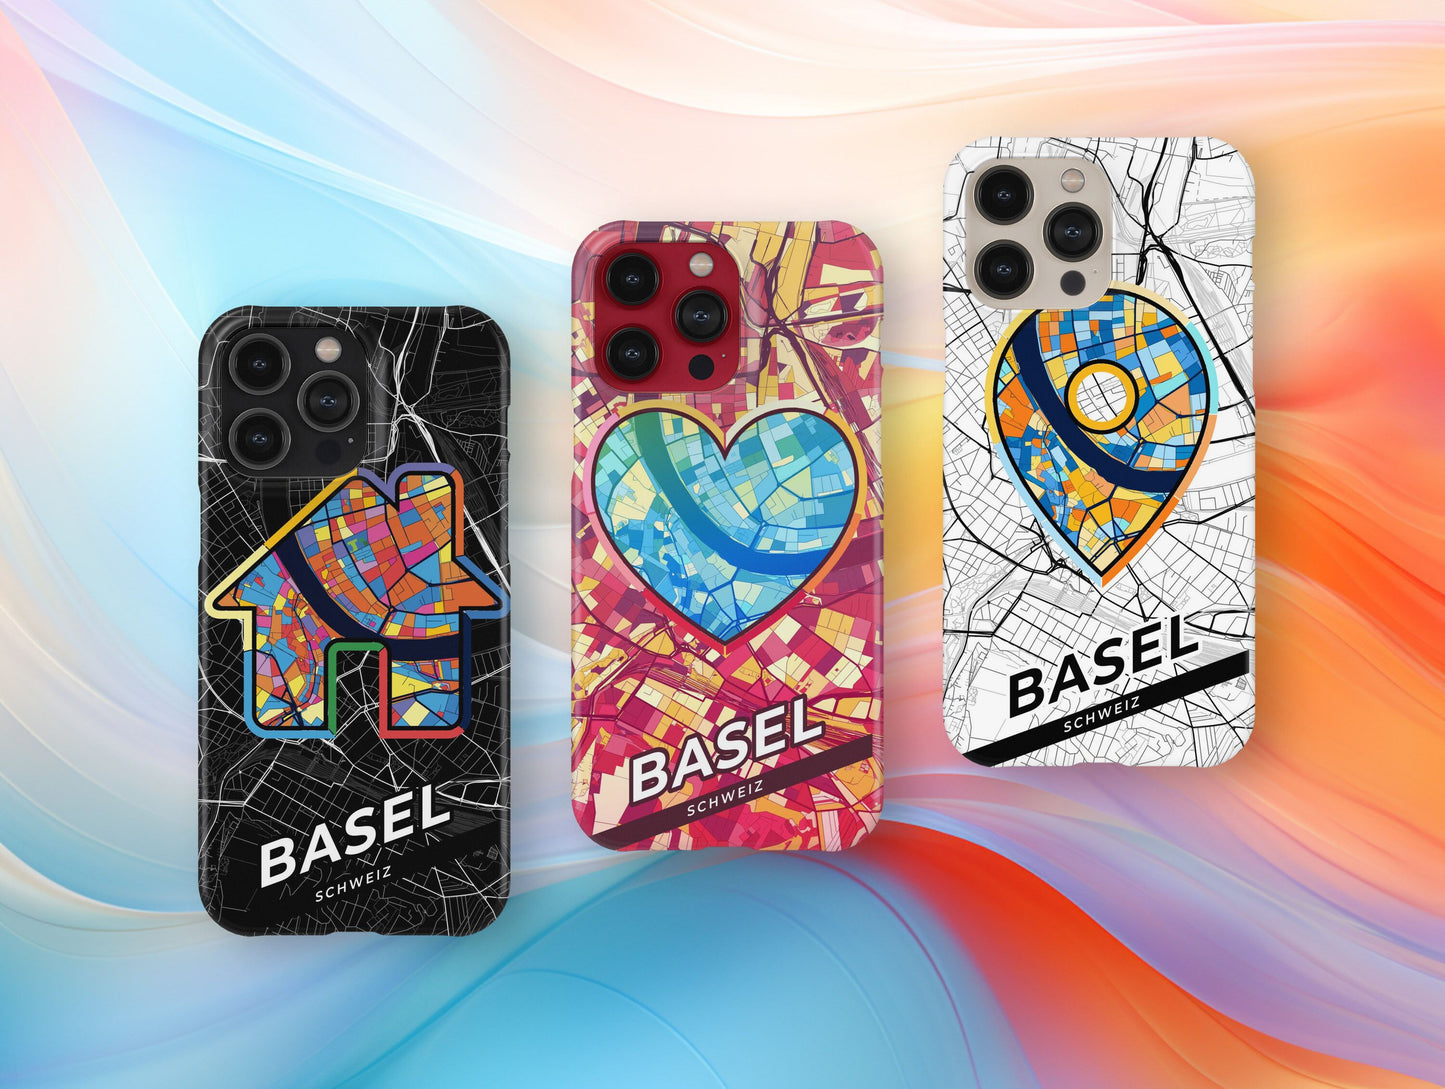 Basel Switzerland slim phone case with colorful icon. Birthday, wedding or housewarming gift. Couple match cases.